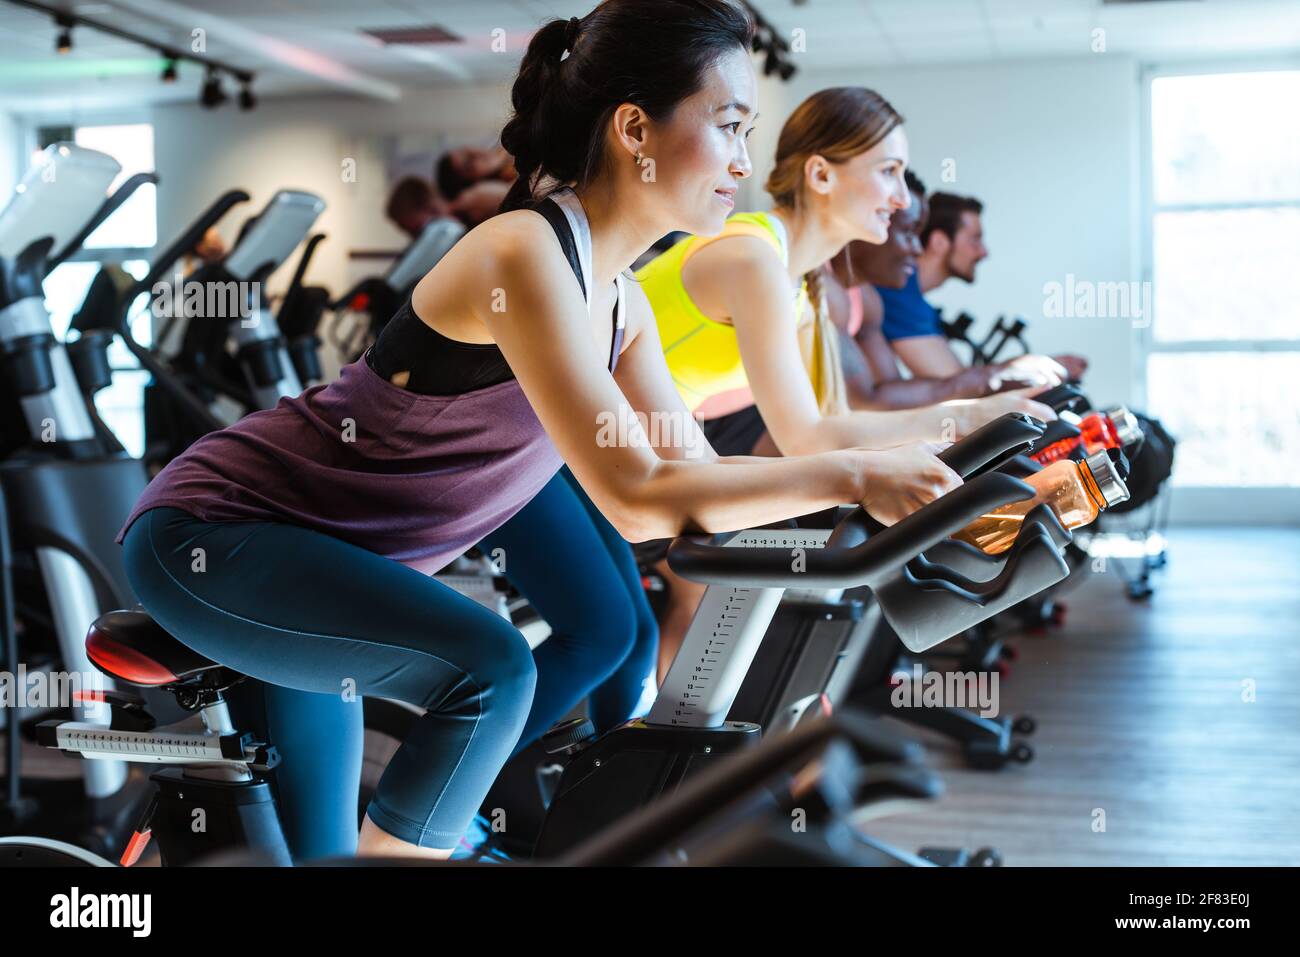 Asian woman and her friends on fitness bike in gym Stock Photo